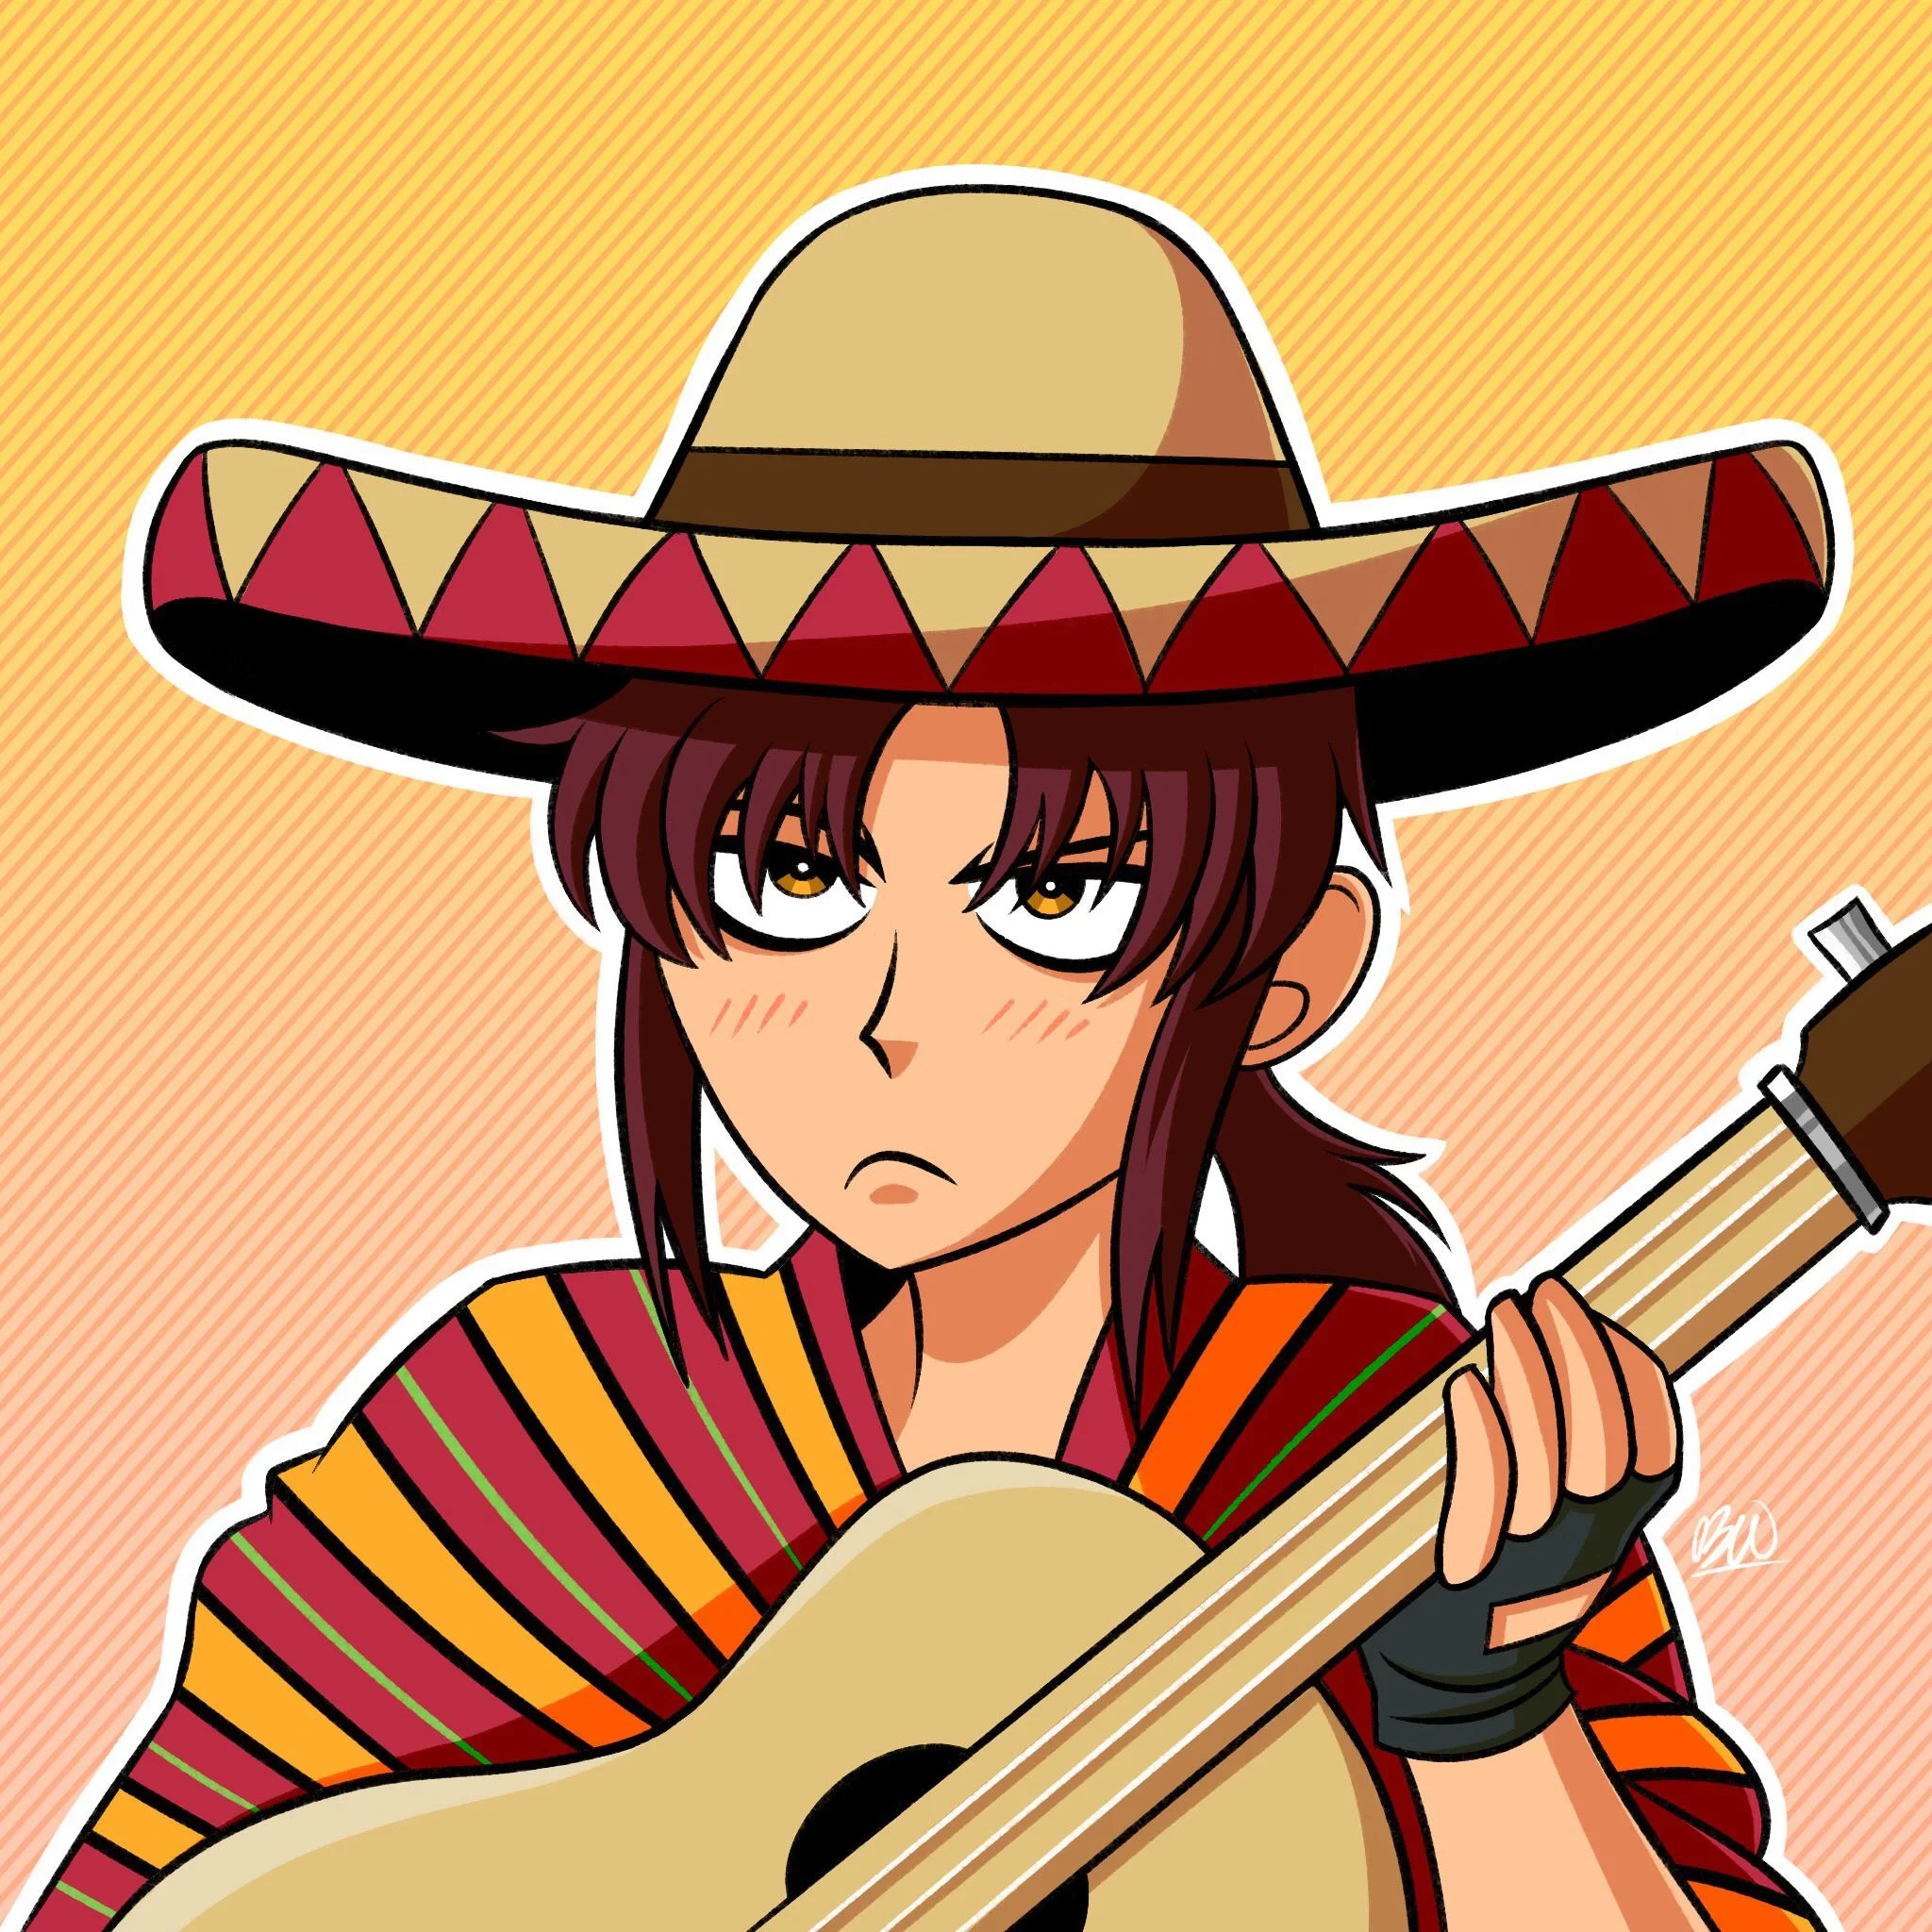 revyomakemexicanblacklagoon_by_Kirbyzilla77.png